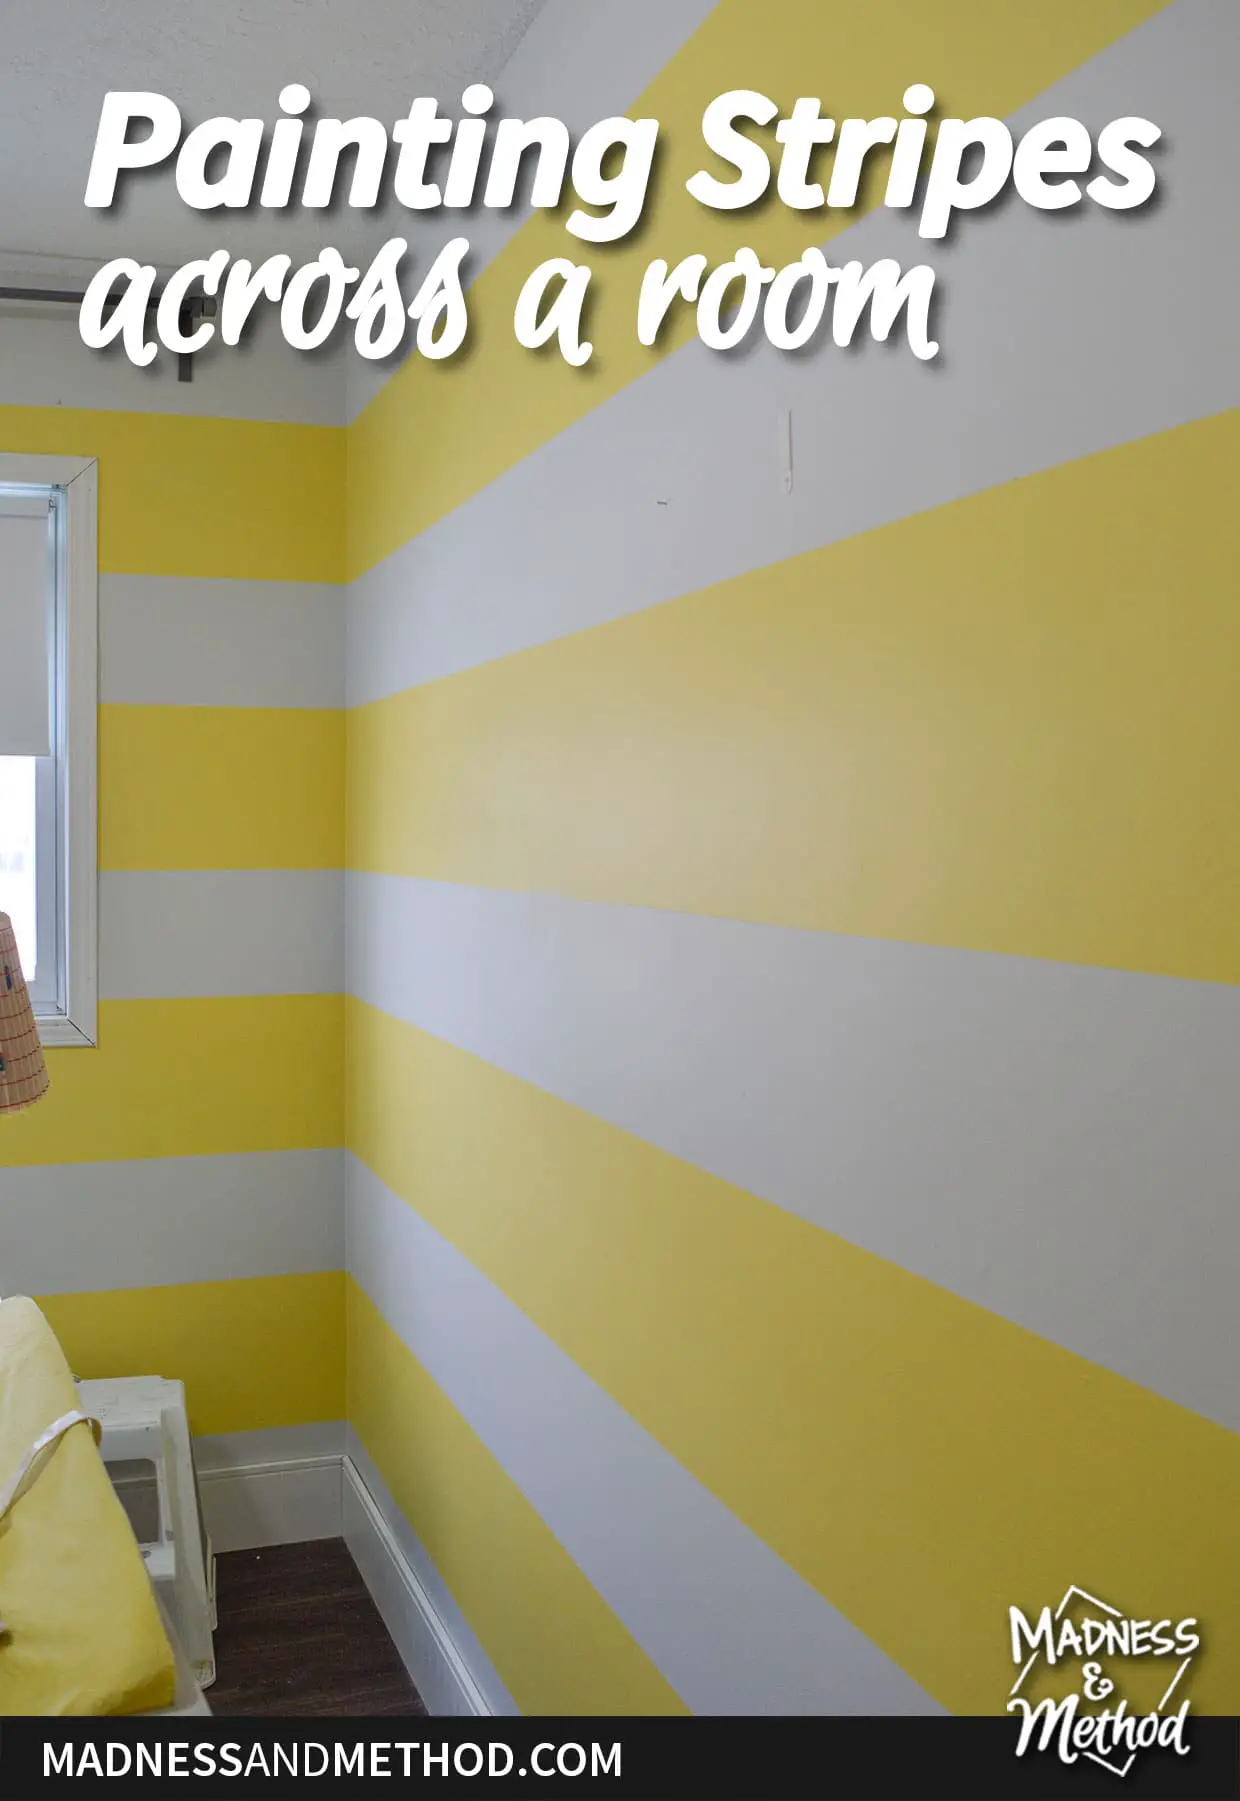 painting stripes across a room text overlay on white and yellow striped walls